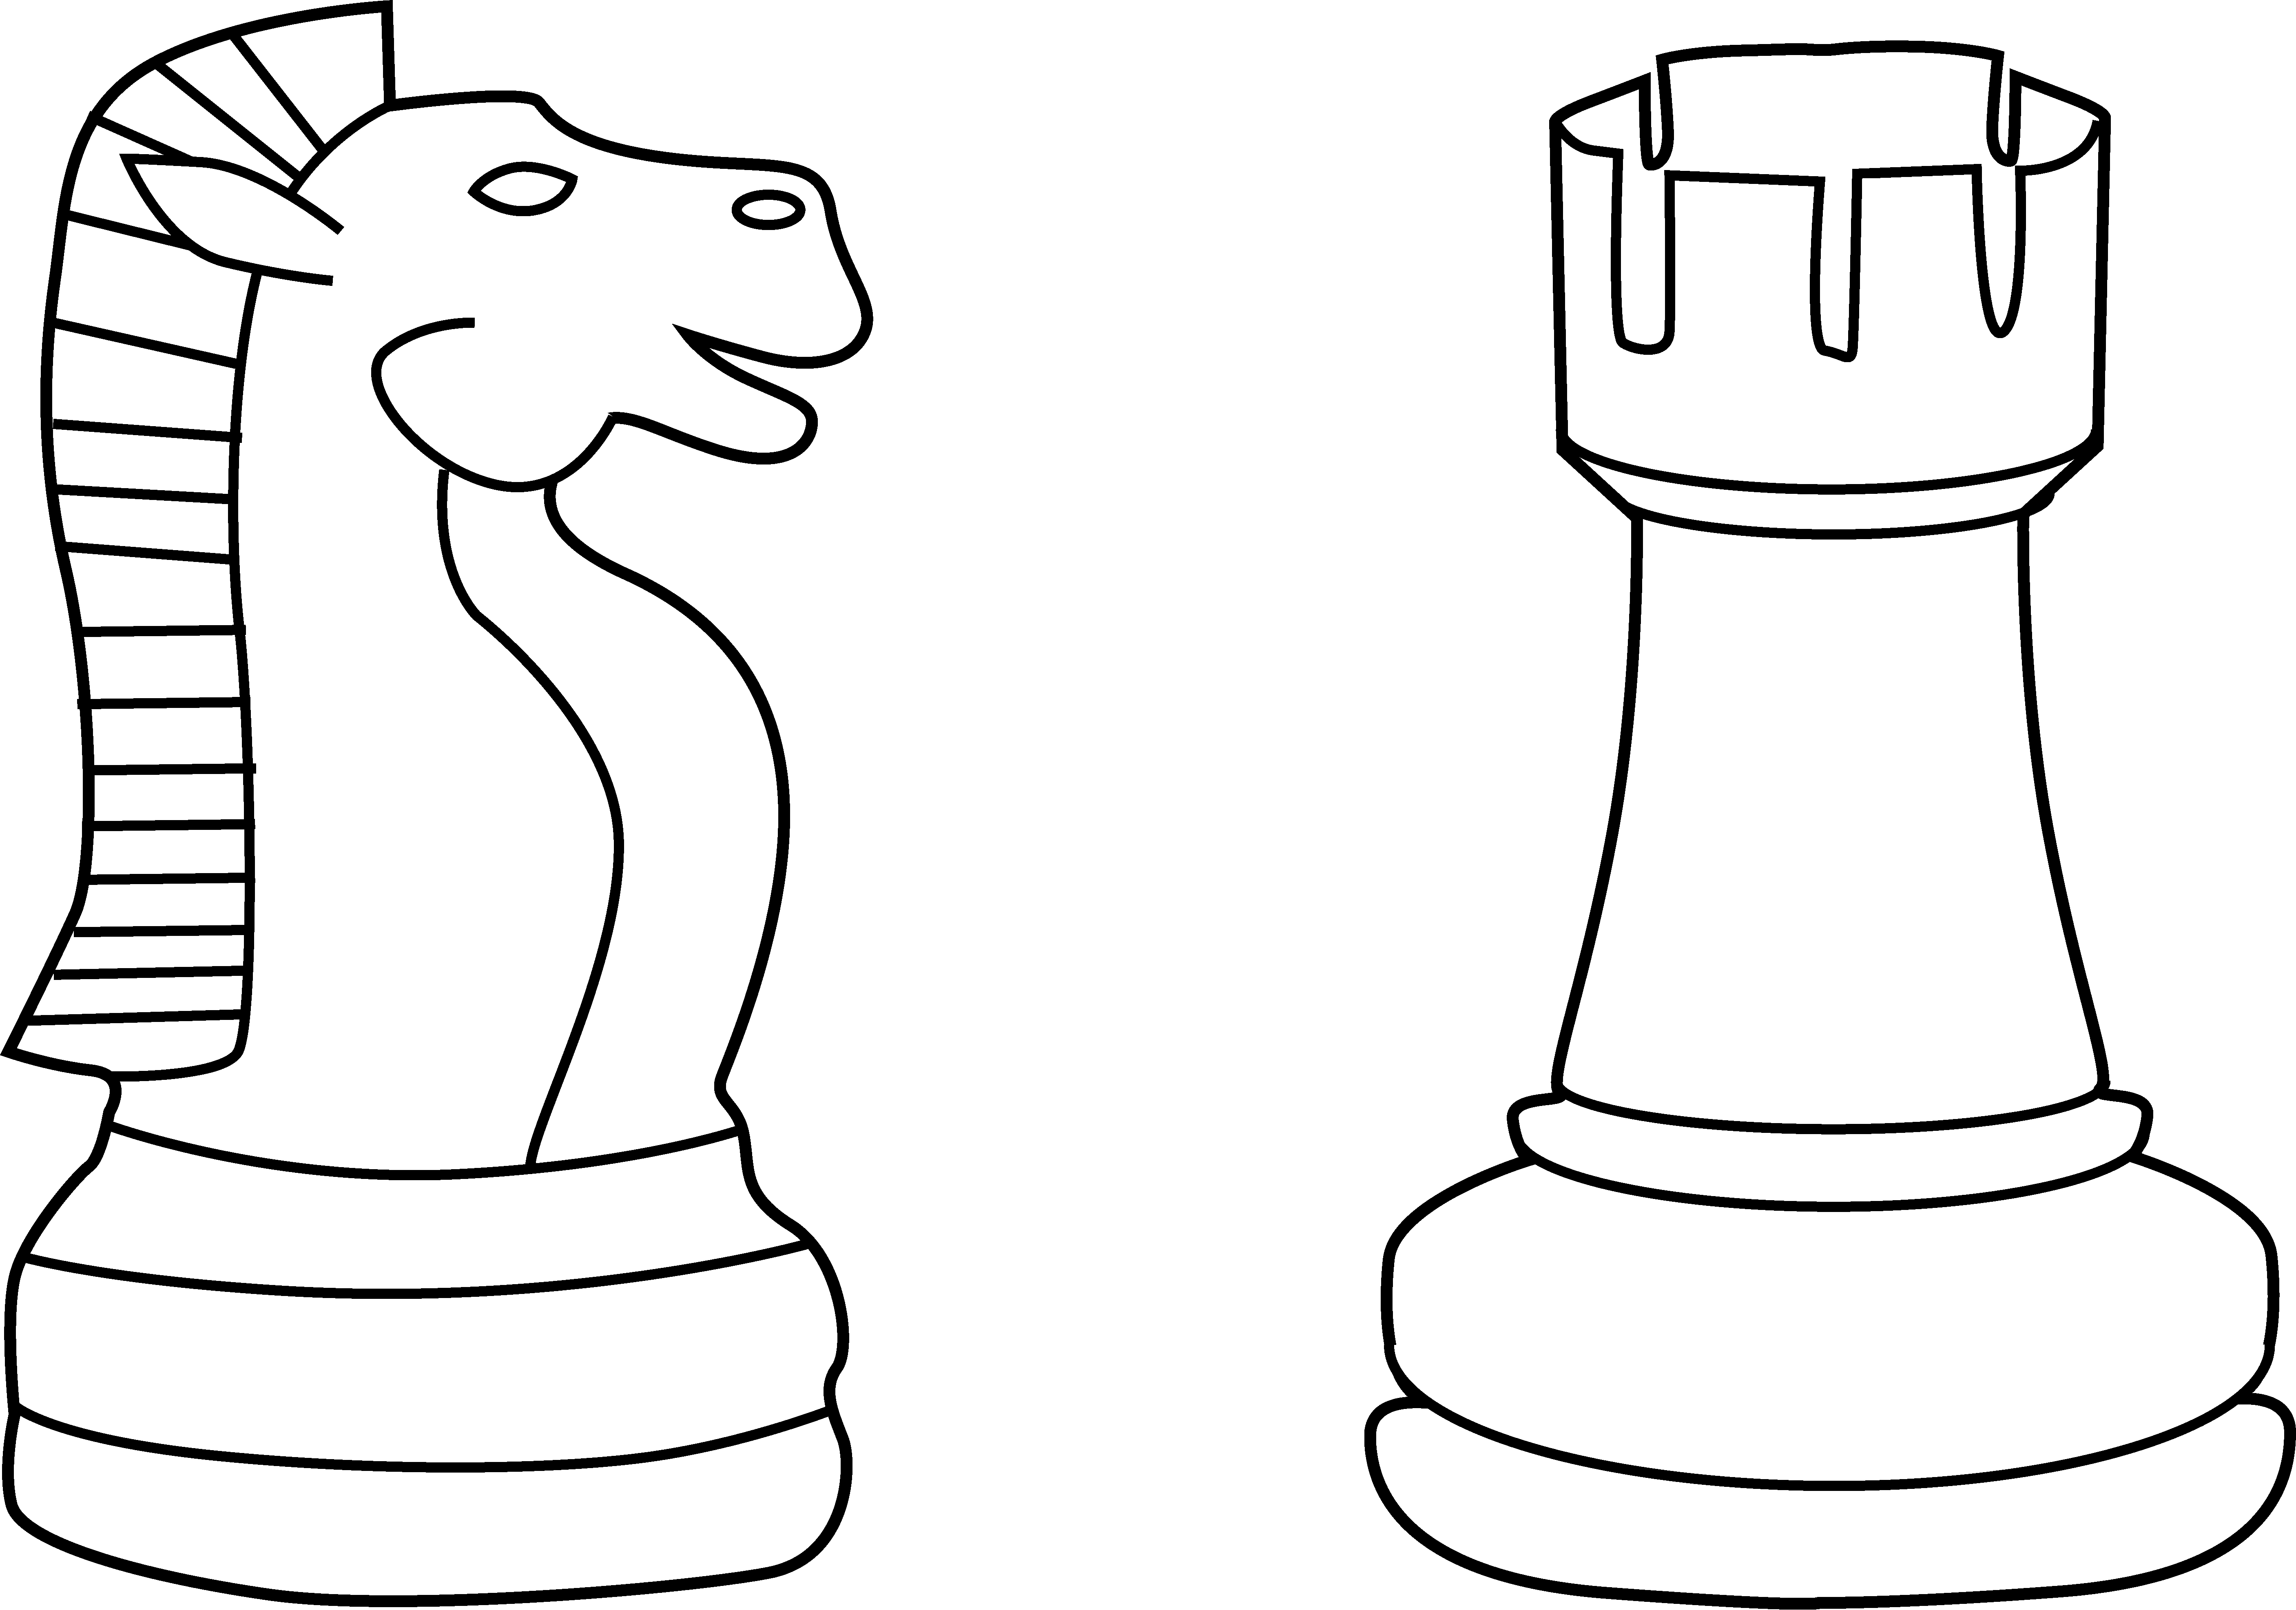 Printable chess boards and chess pieces for kids – Tim's Printables | Chess  board, Chess pieces, Chess